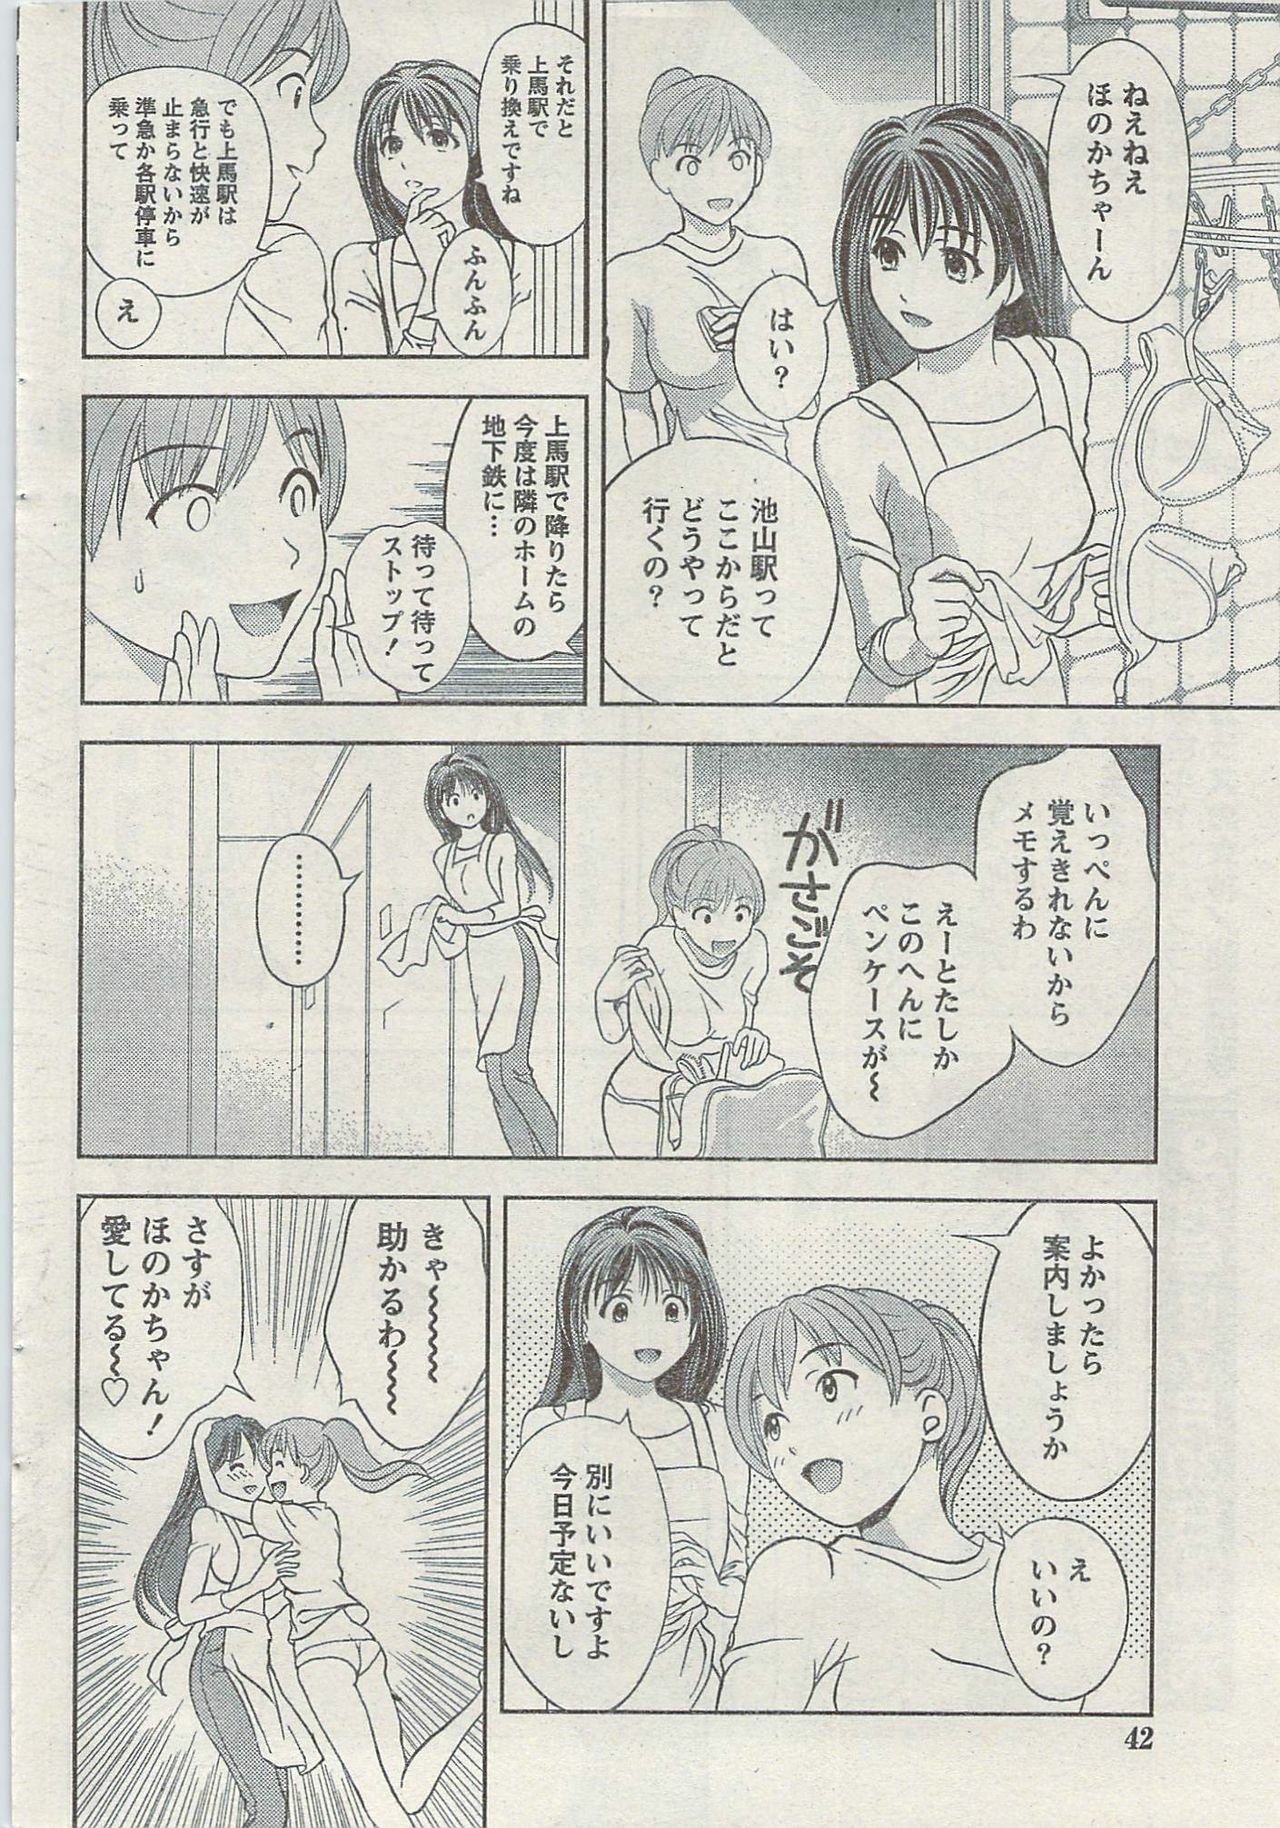 Monthly Vitaman 2007-08 page 42 full